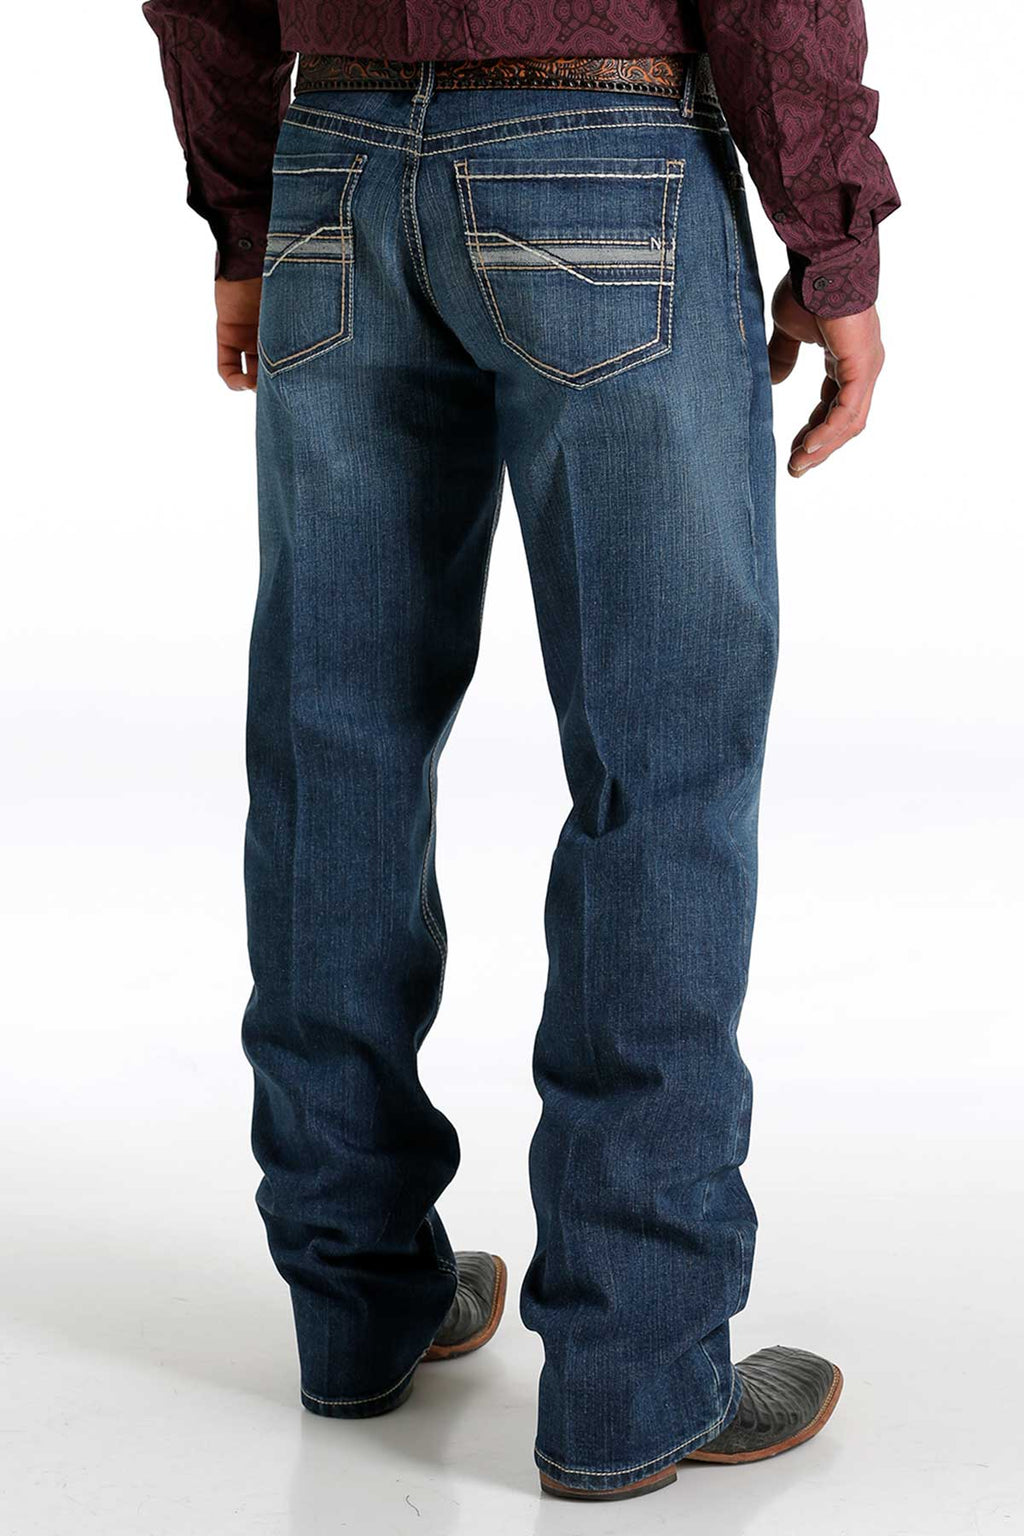 Cinch Men's Grant Mid Rise Relaxed Boot Cut Jeans - MB55937001 - Nate's Western Wear